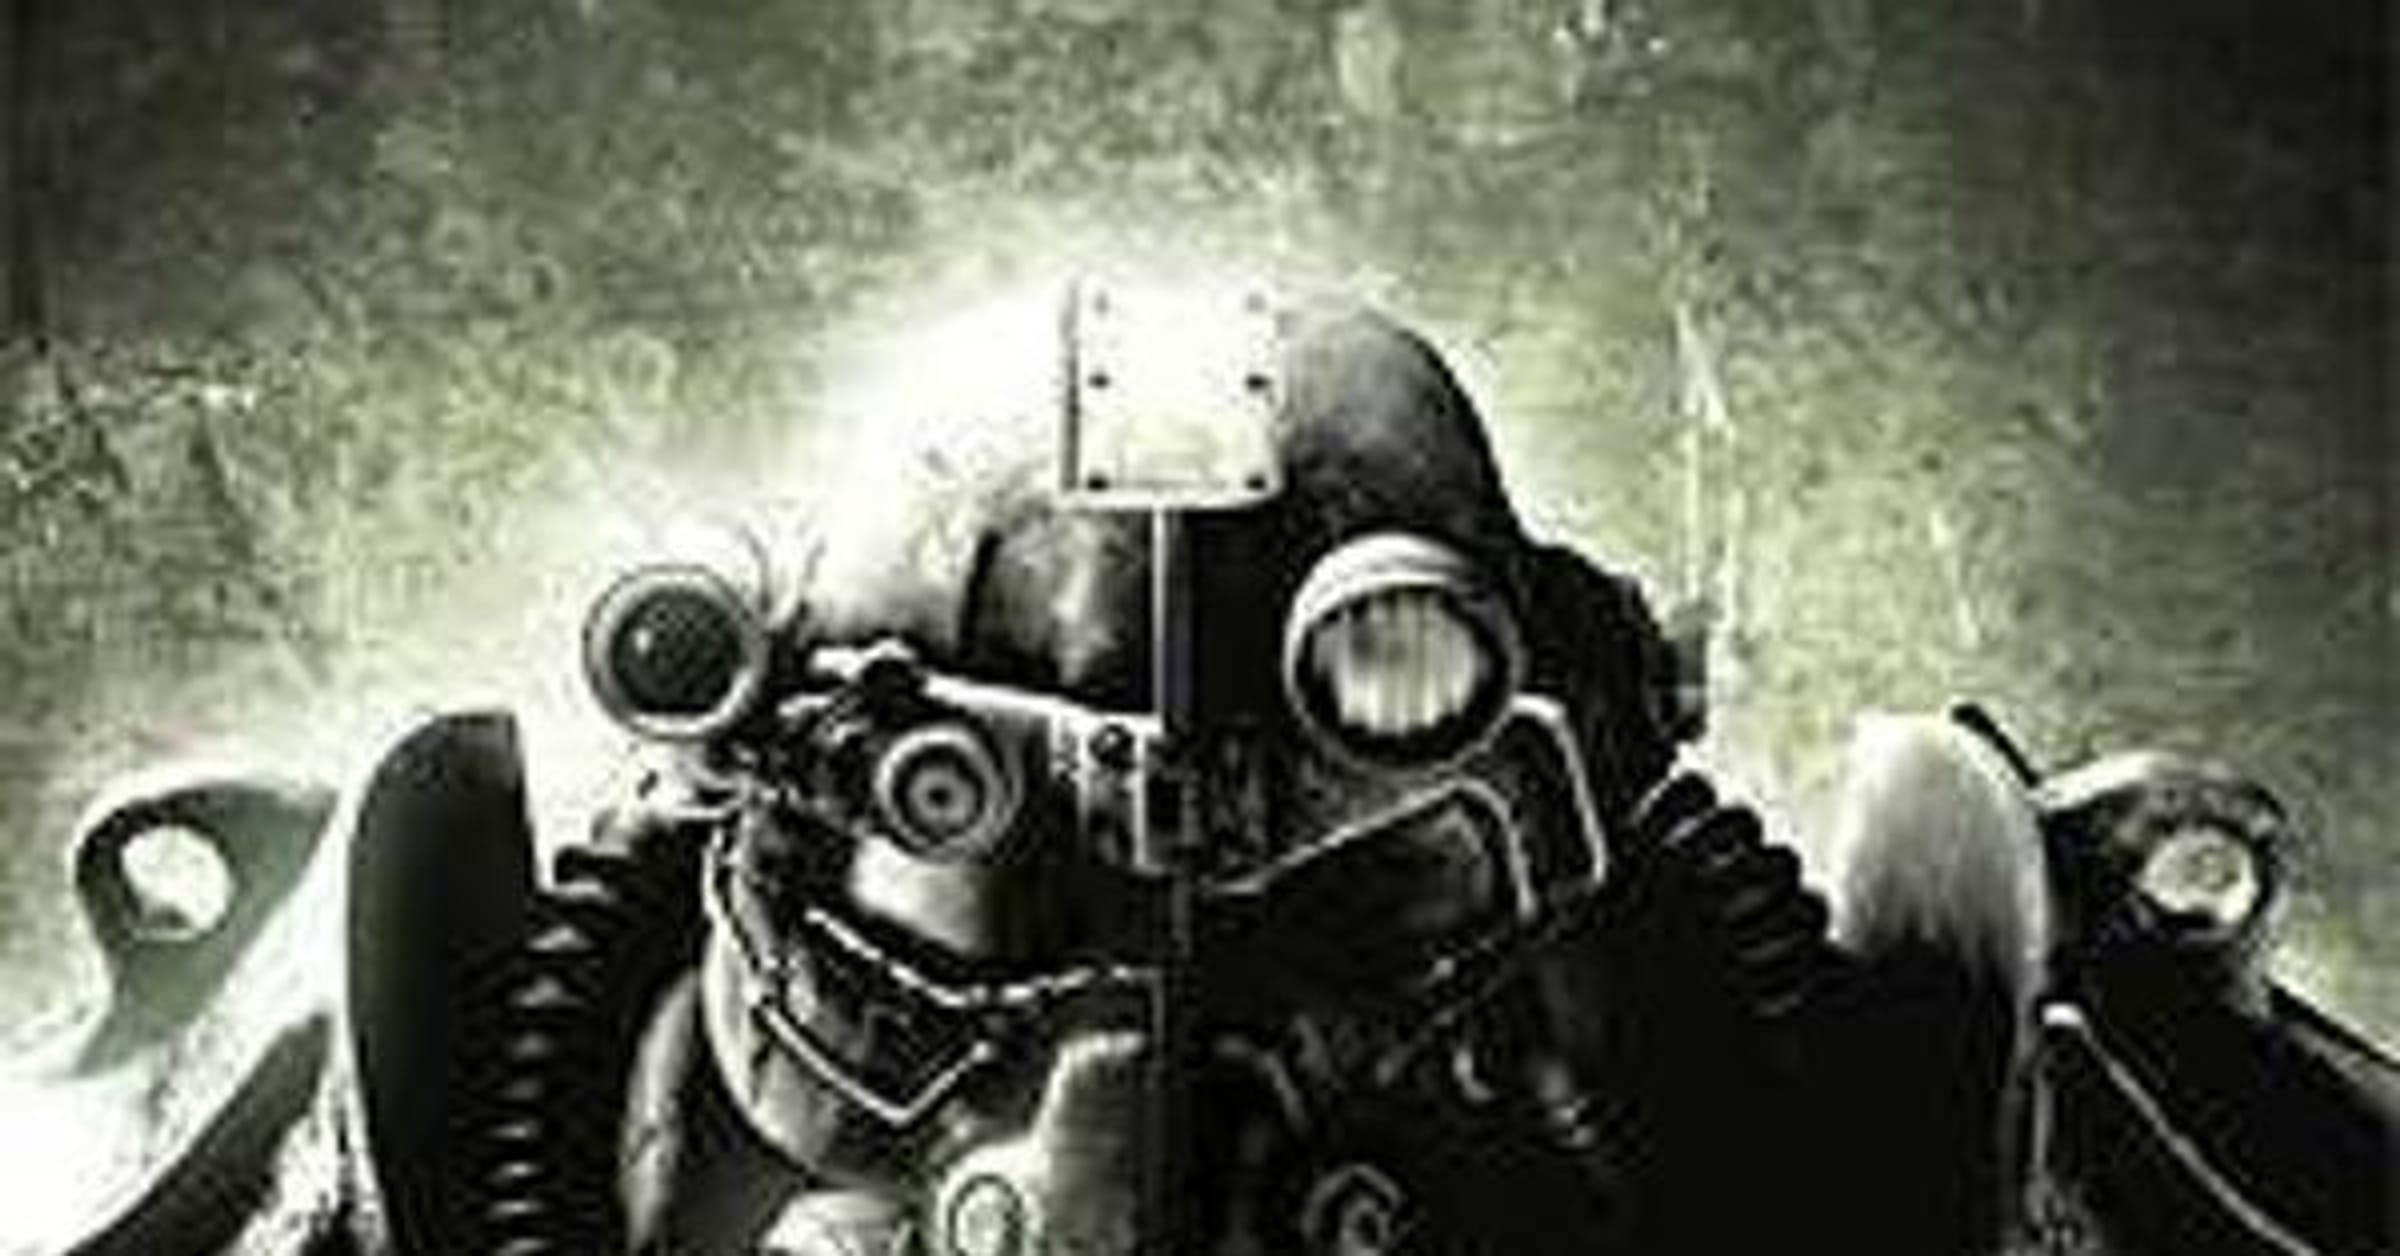 Steam Sales Review #14: Fallout New Vegas